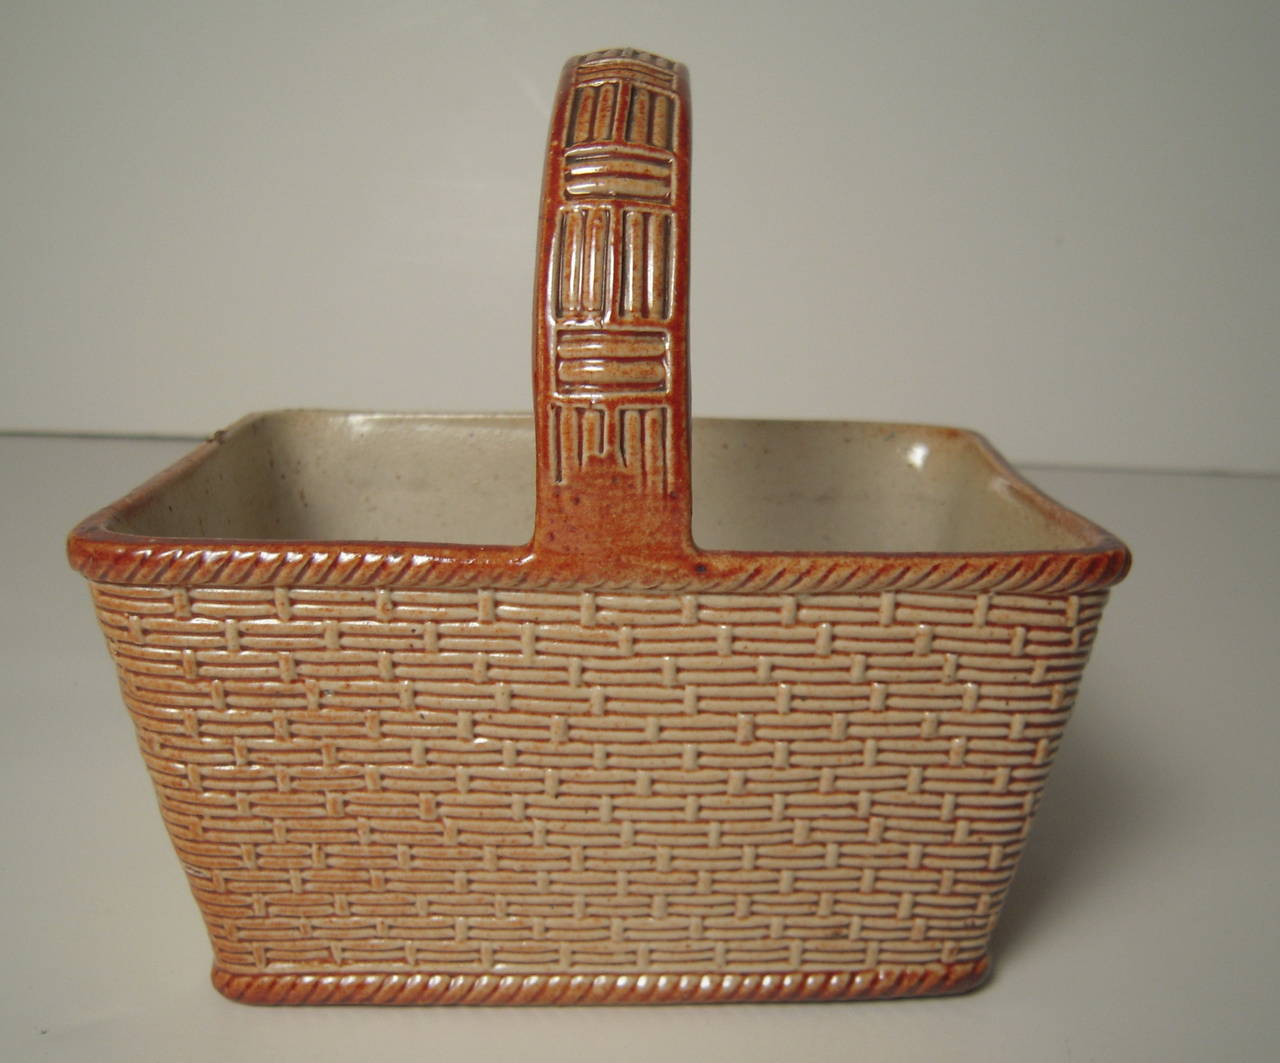 An English salt glazed stoneware pottery berry basket by S and H Briddon, circa 1848-1860, with impressed maker's mark on bottom, the basket of rectangular form with rounded corners and molded basket weave design in cream and brown glaze, with a